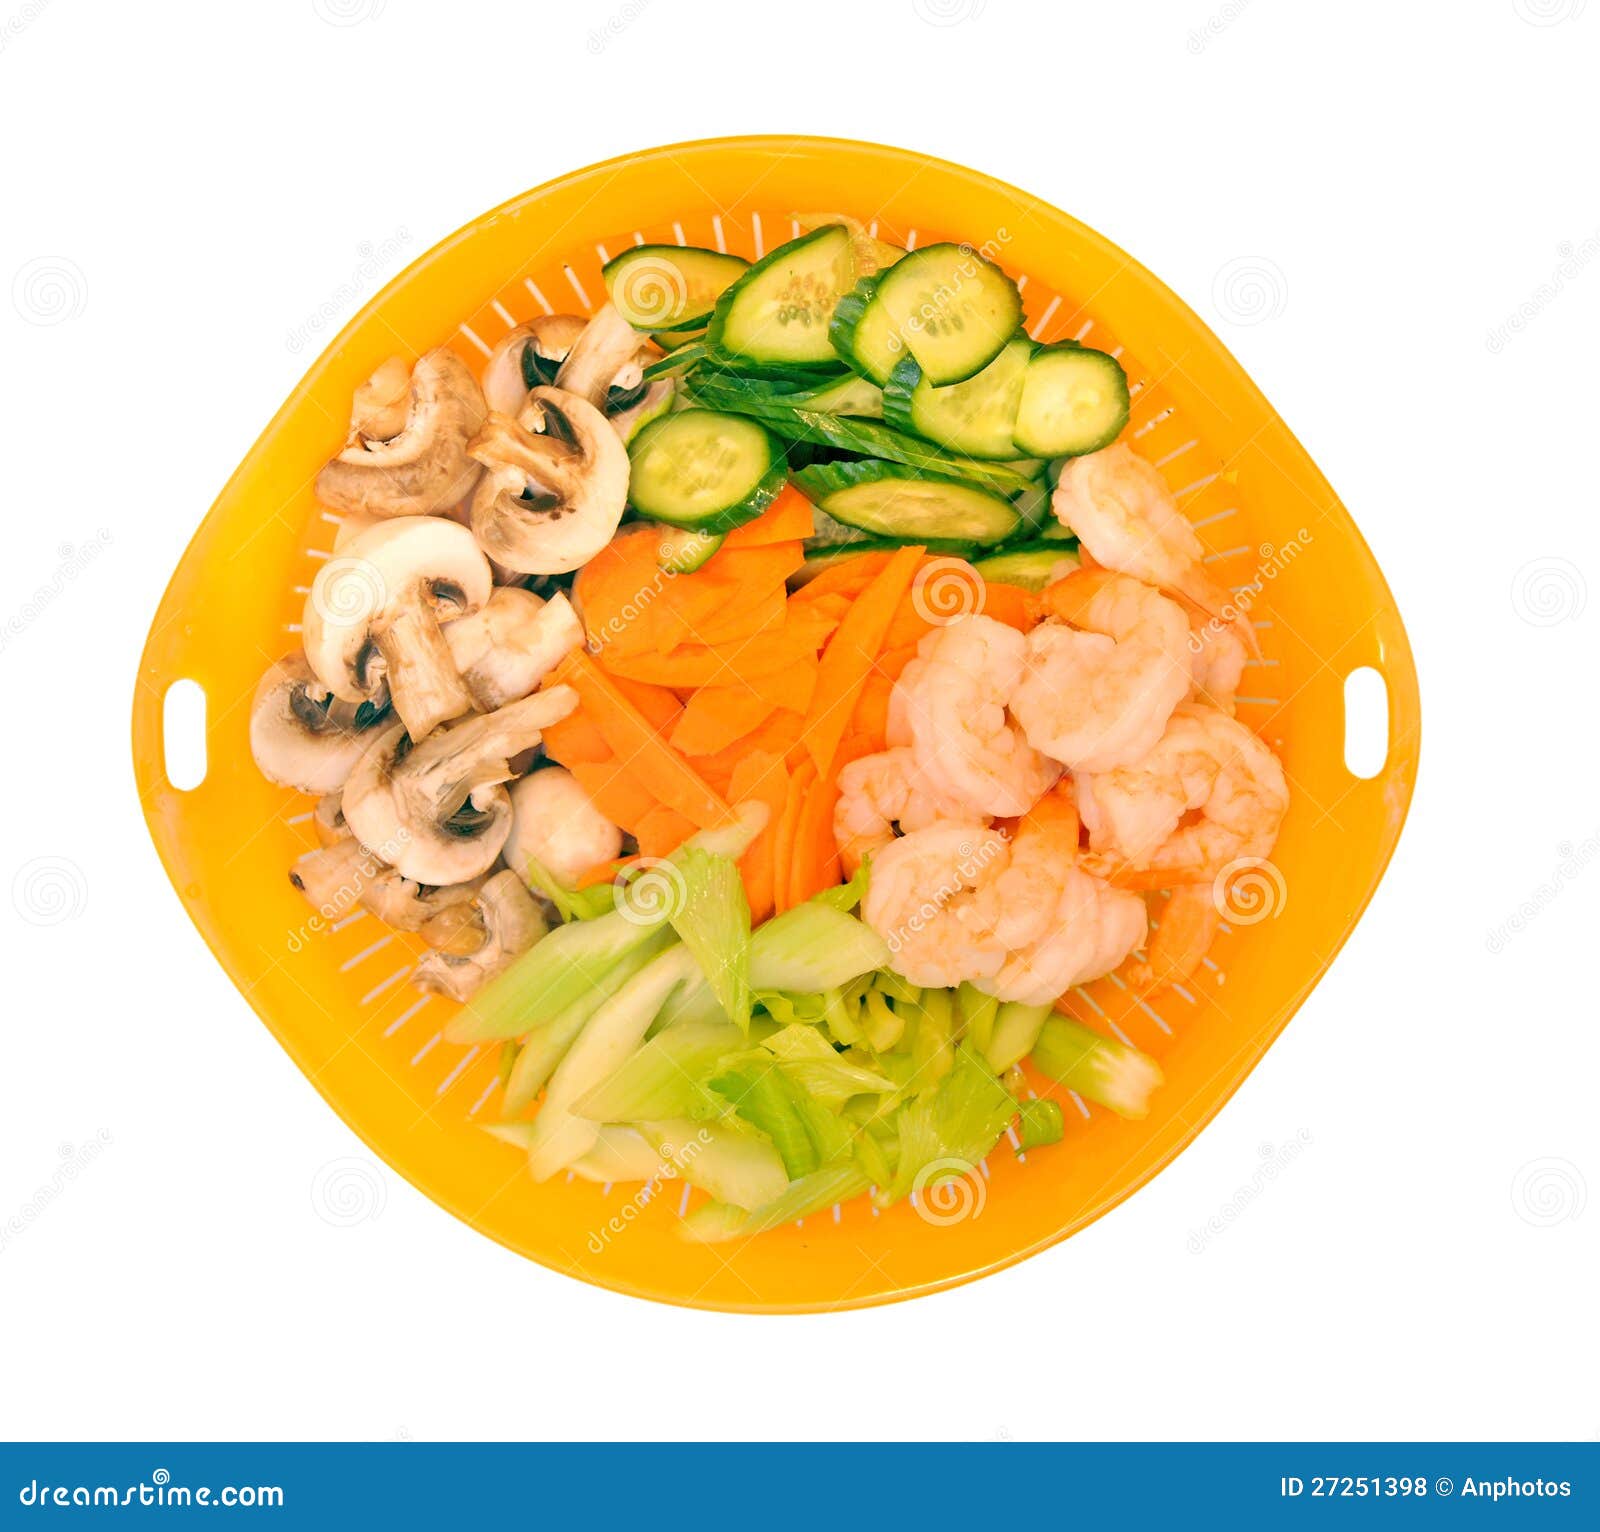 mix of vegetable and shrimp